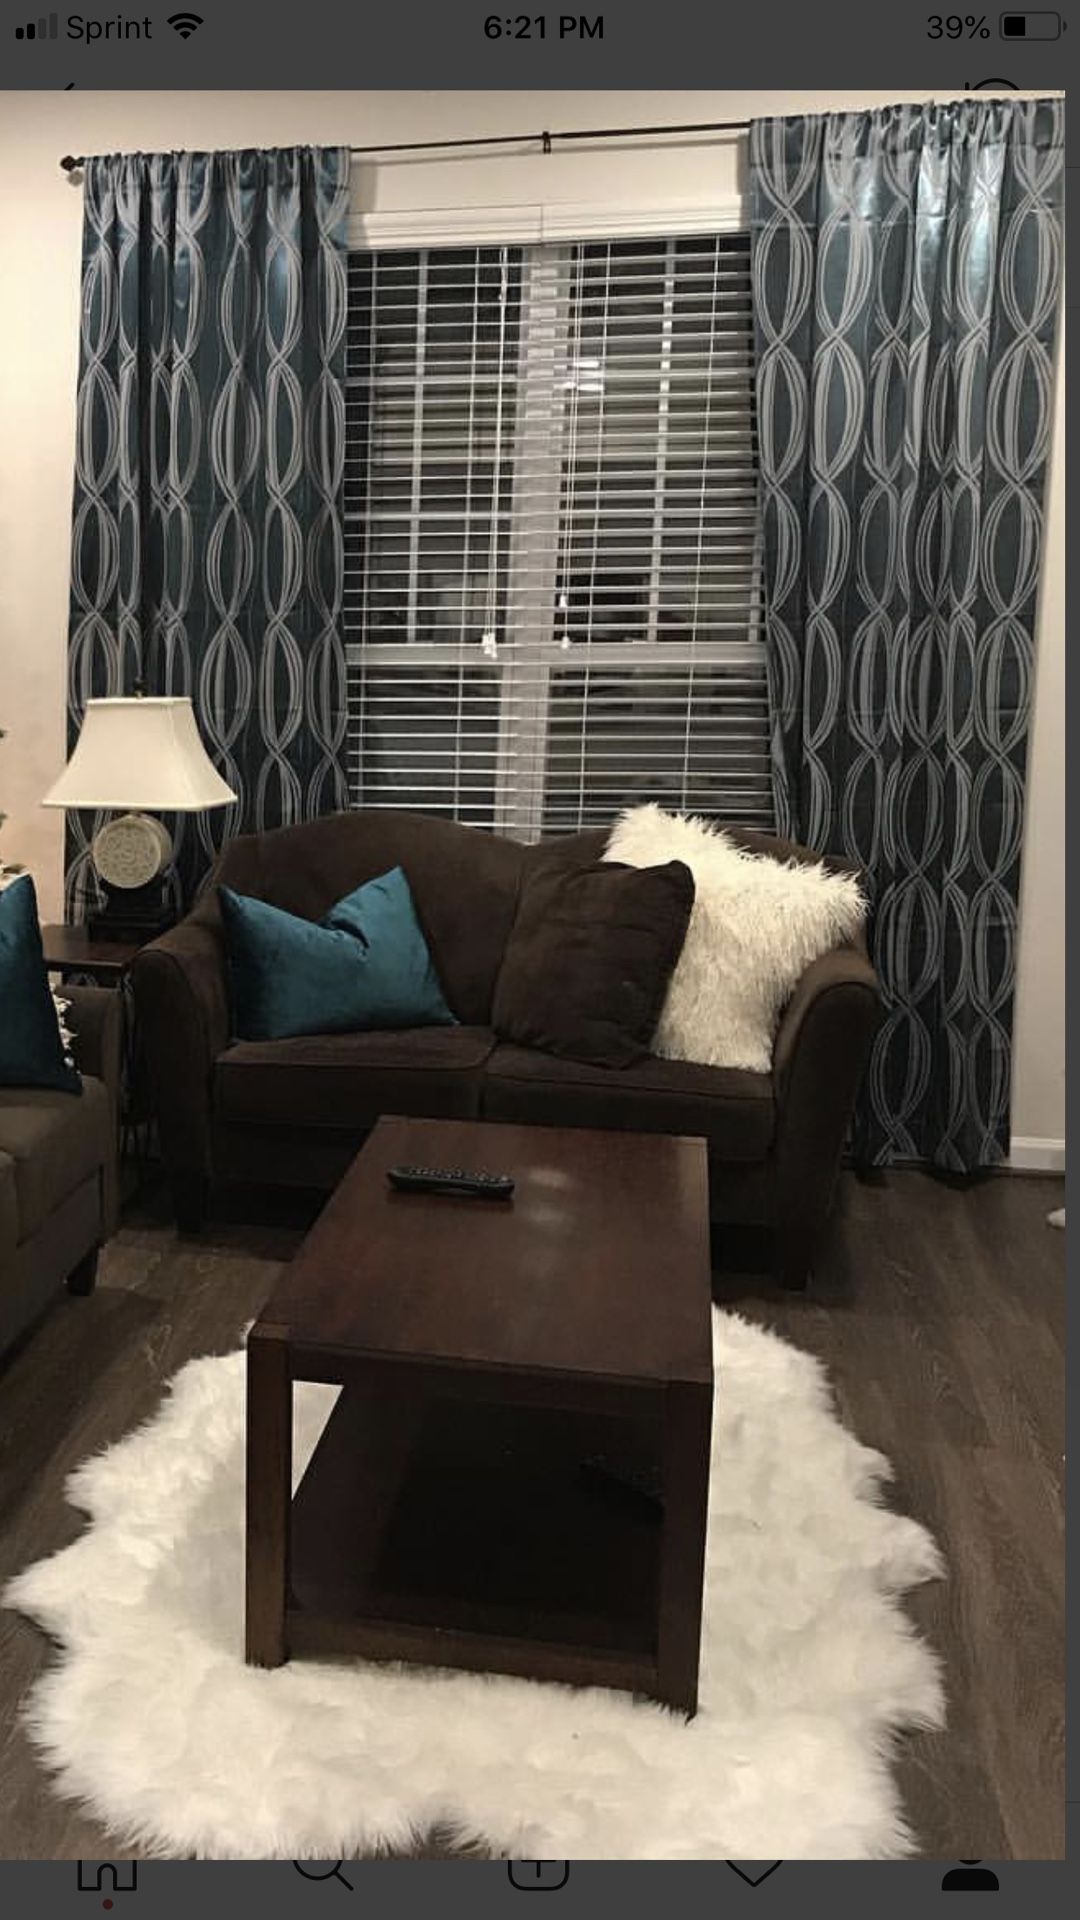 Curtains and Decorative Pillows